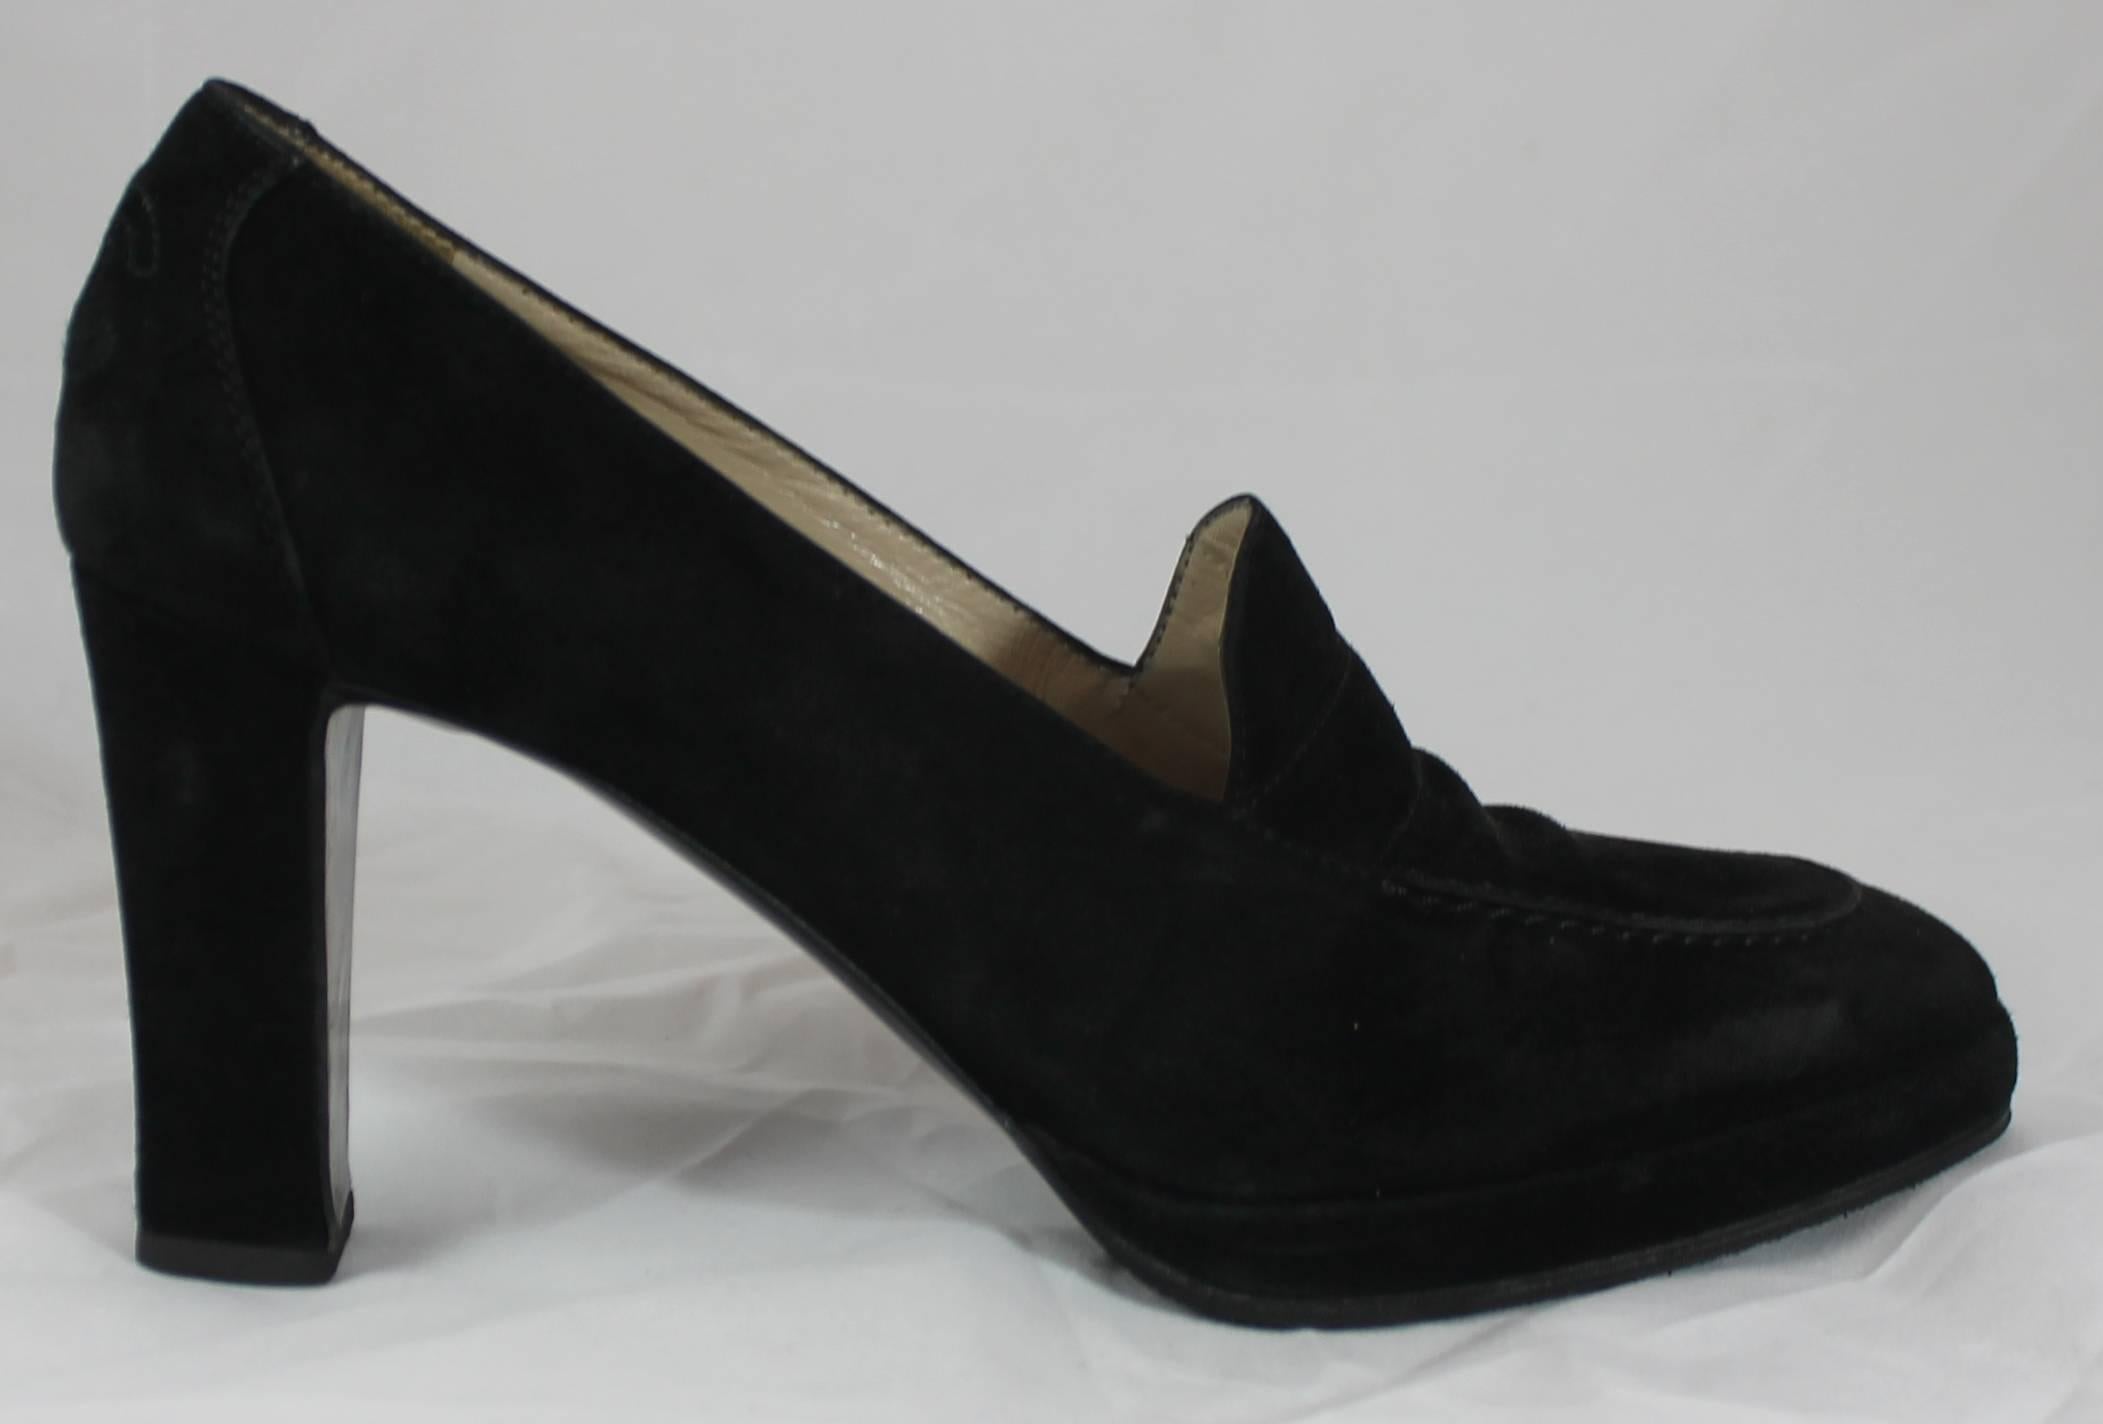 Chanel Black Suede Loafer Style Pumps - 36.5. These loafers are black suede with a vintage feel to them. They are in good condition with some discoloration on the suede.

Measurements:
Heel: 3.25